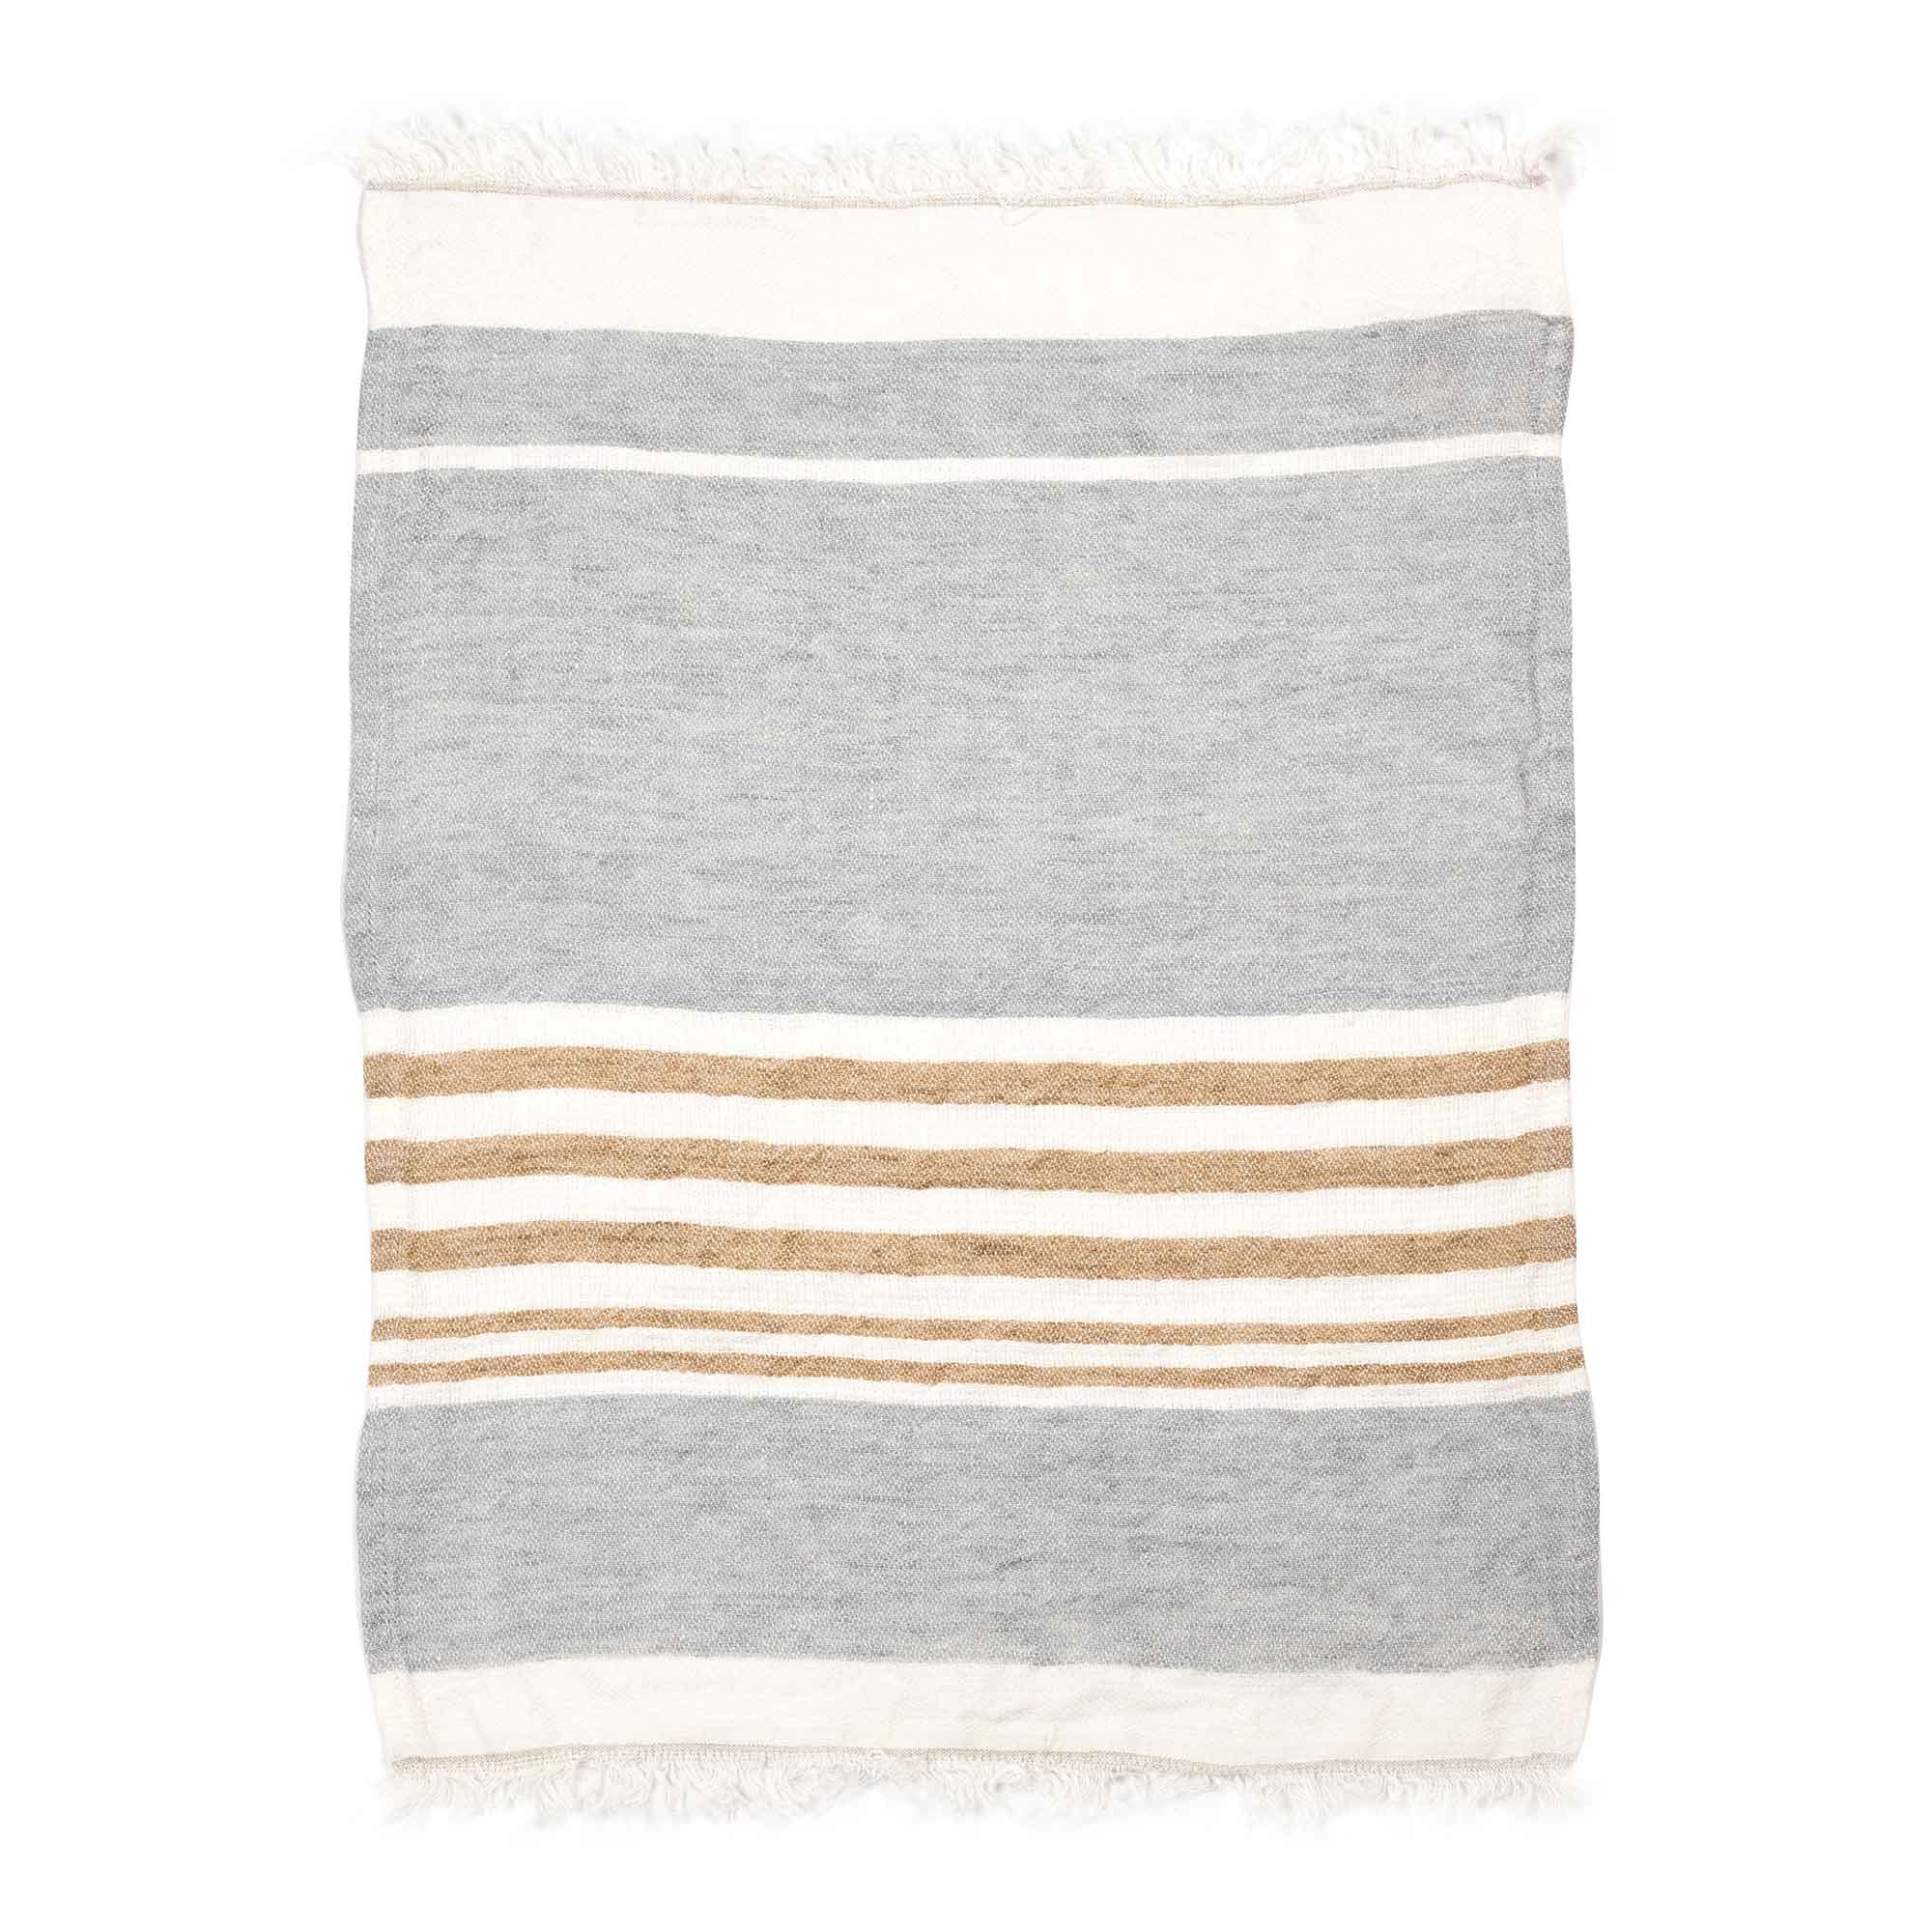 Belgian linen fouta throw blanket flat lay product shot in color Ash by Libeco for South Hous.